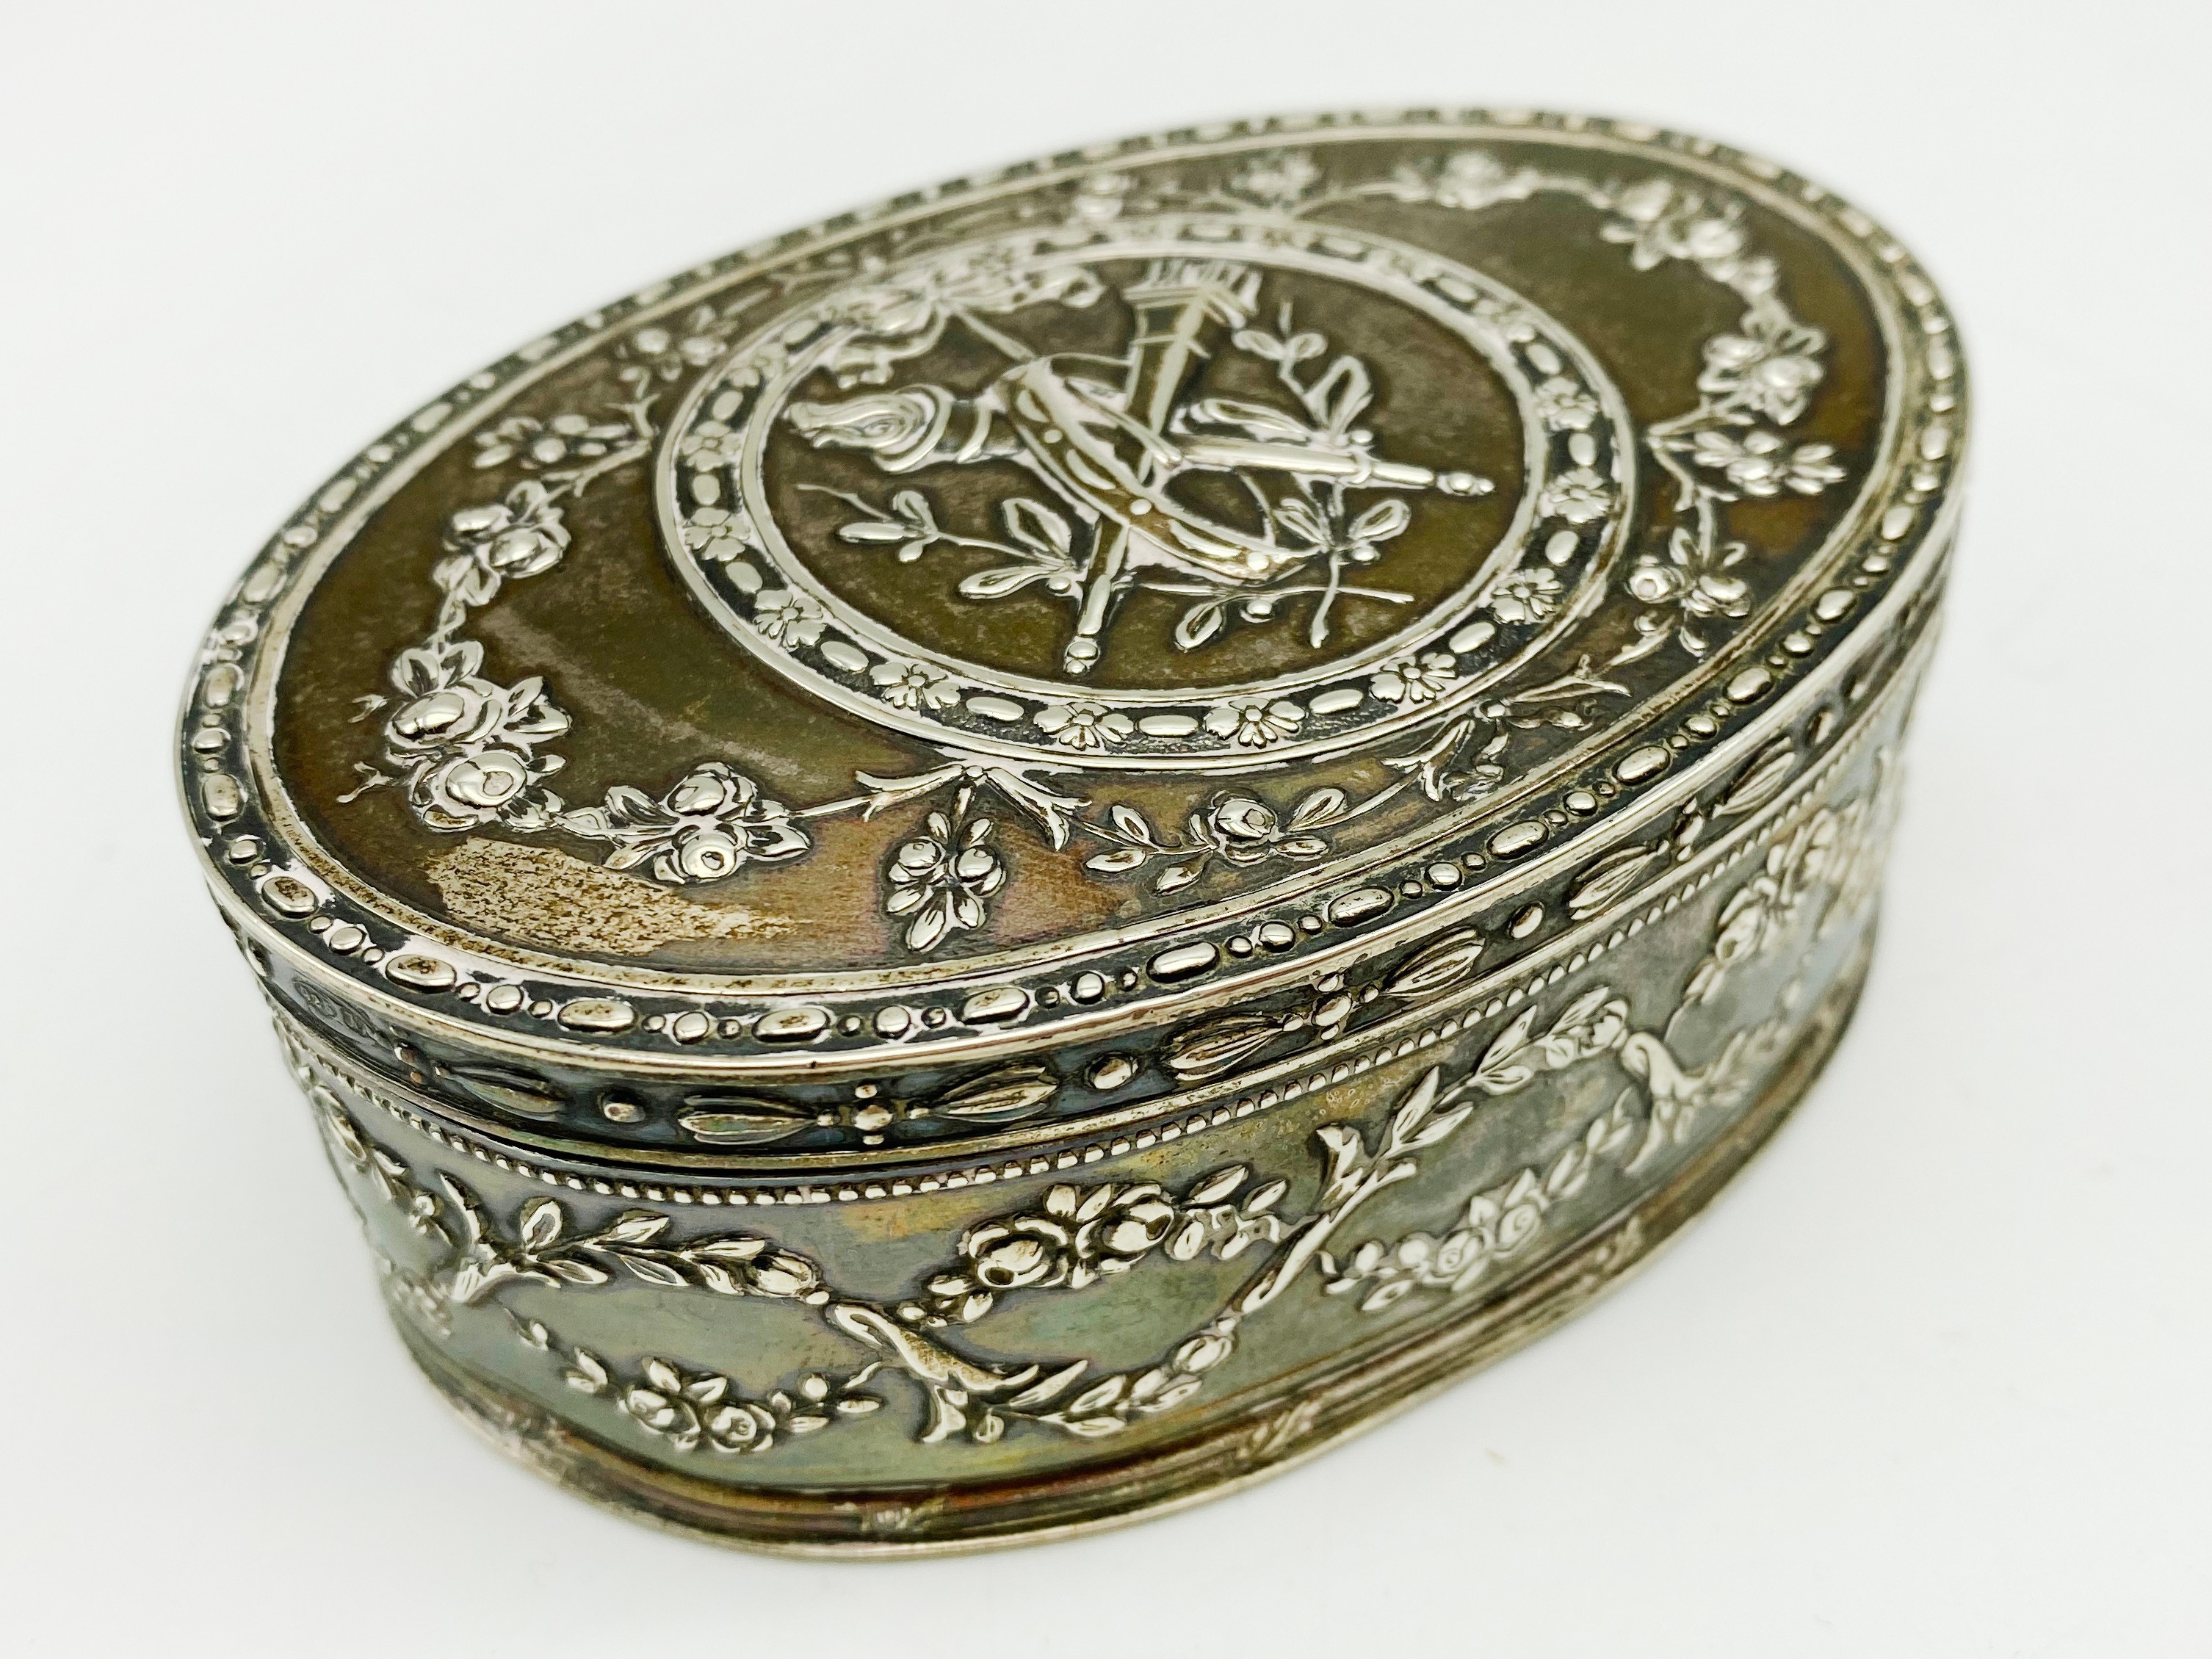 ANTIQUE HALLMARKED HANAU SILVER REPOUSSE TABLE SNUFF BOX IMPORTED HALLMARKED FOR BOAZ MOSES LANDECK - Image 7 of 7